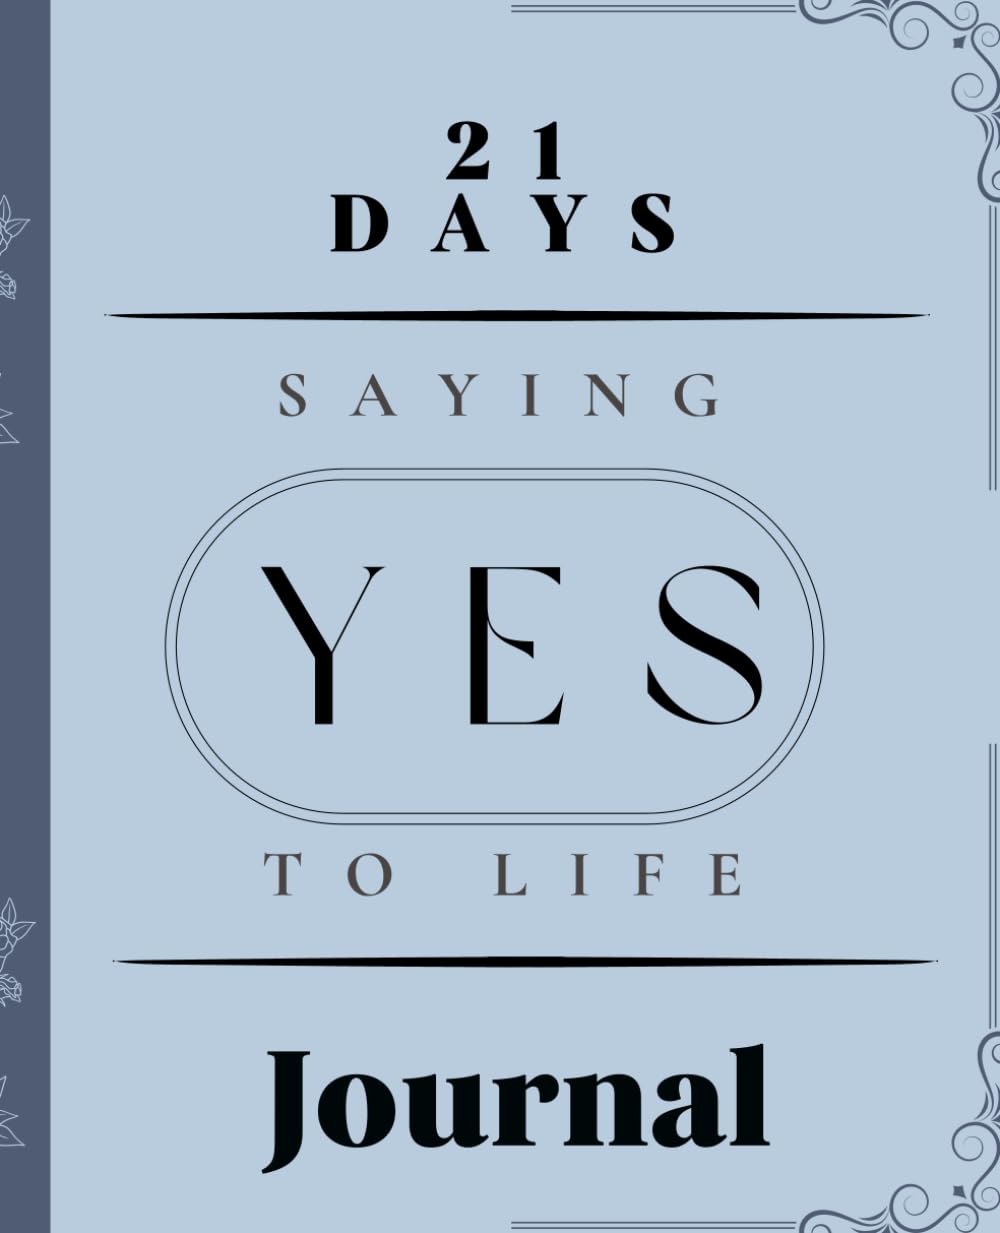 Say "Yes" to Life